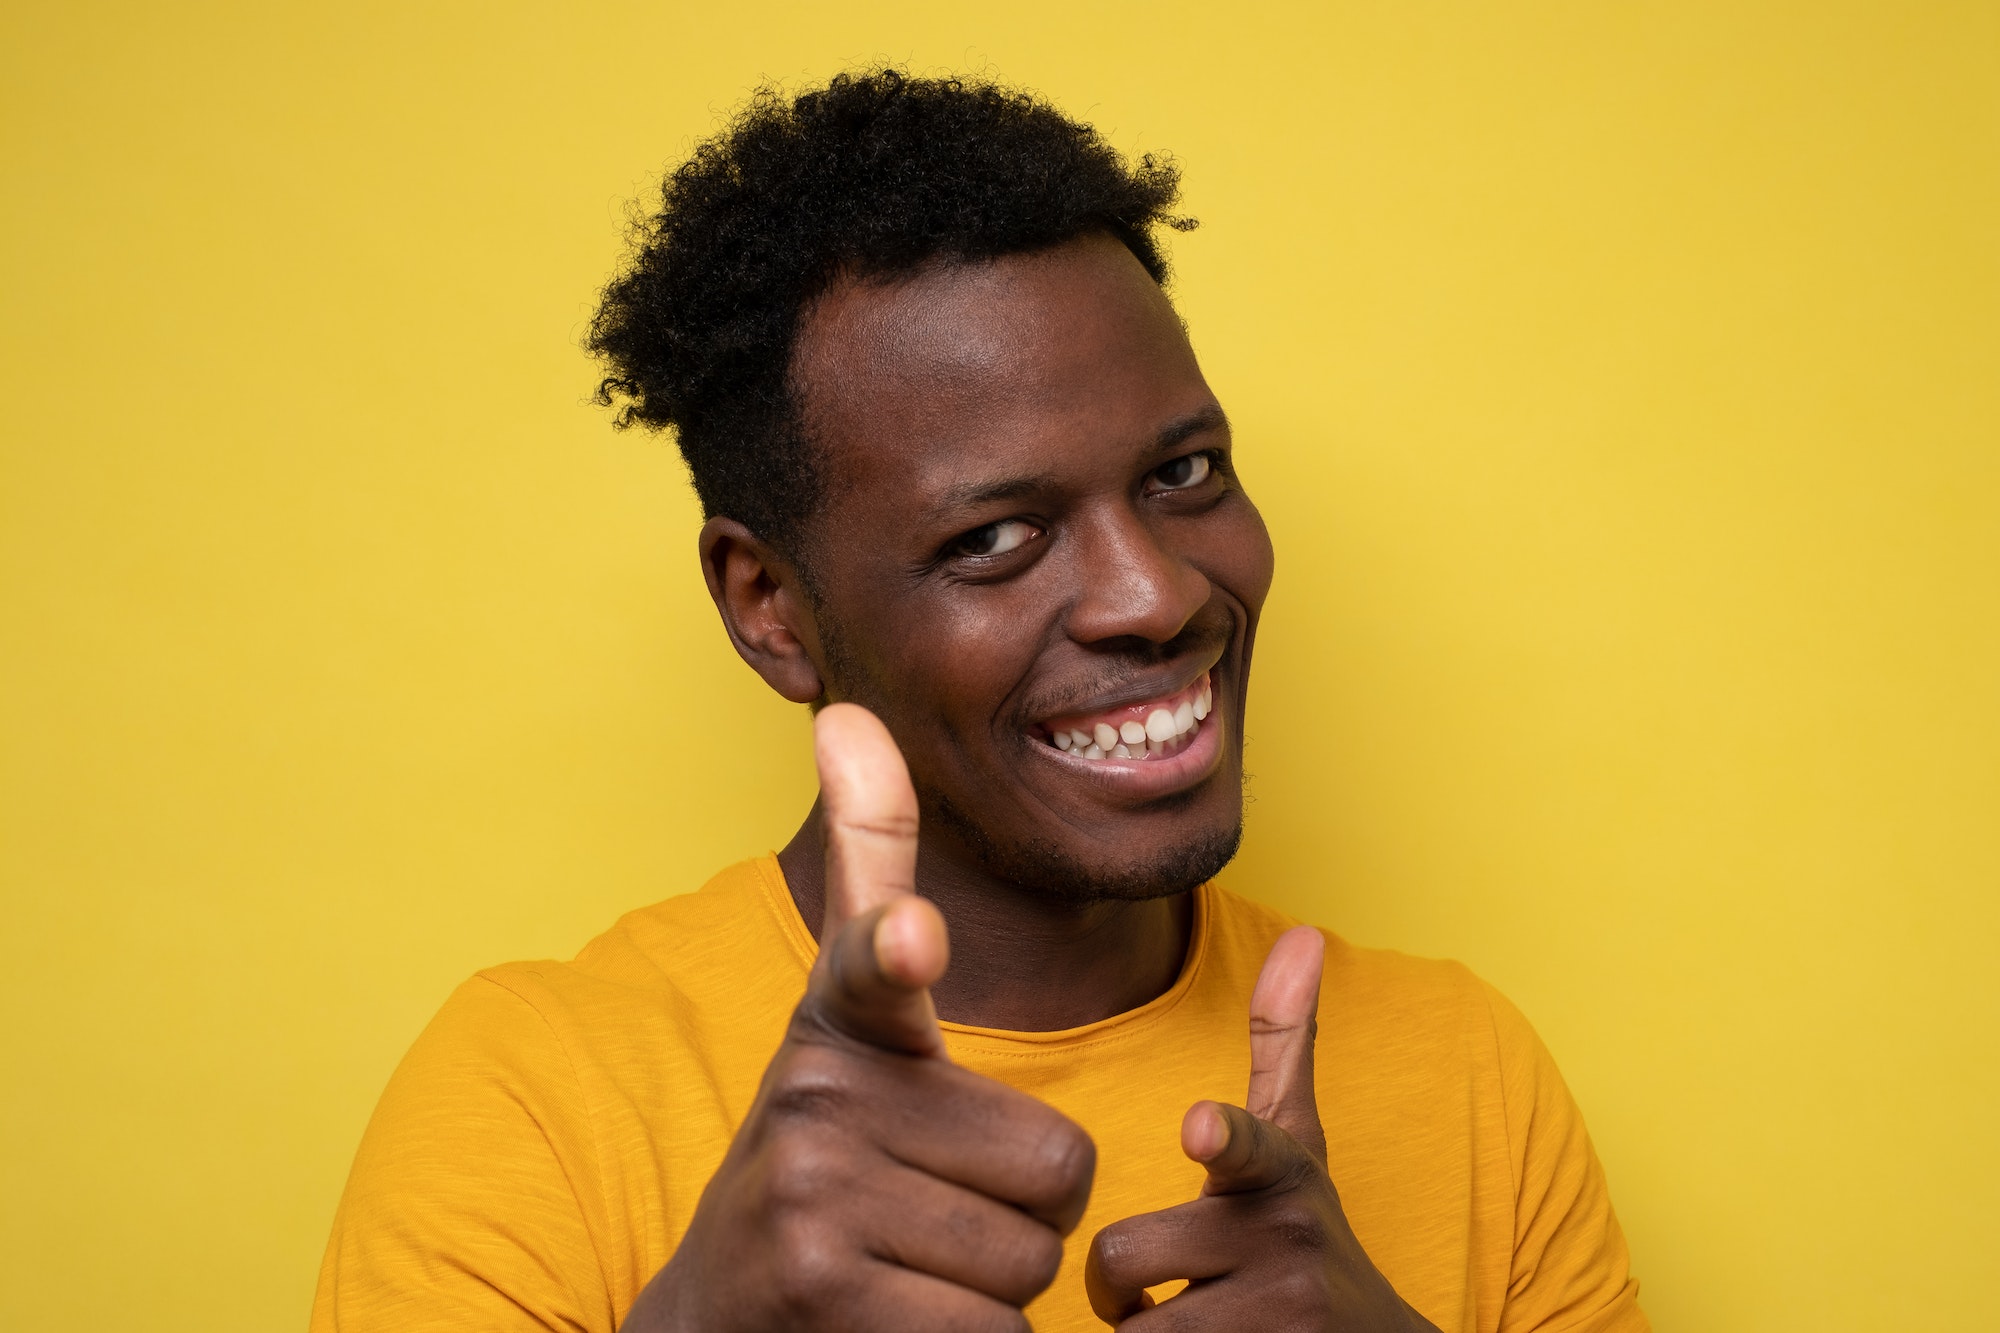 Funny young african man smiling happily and pointing his index fingers at camera